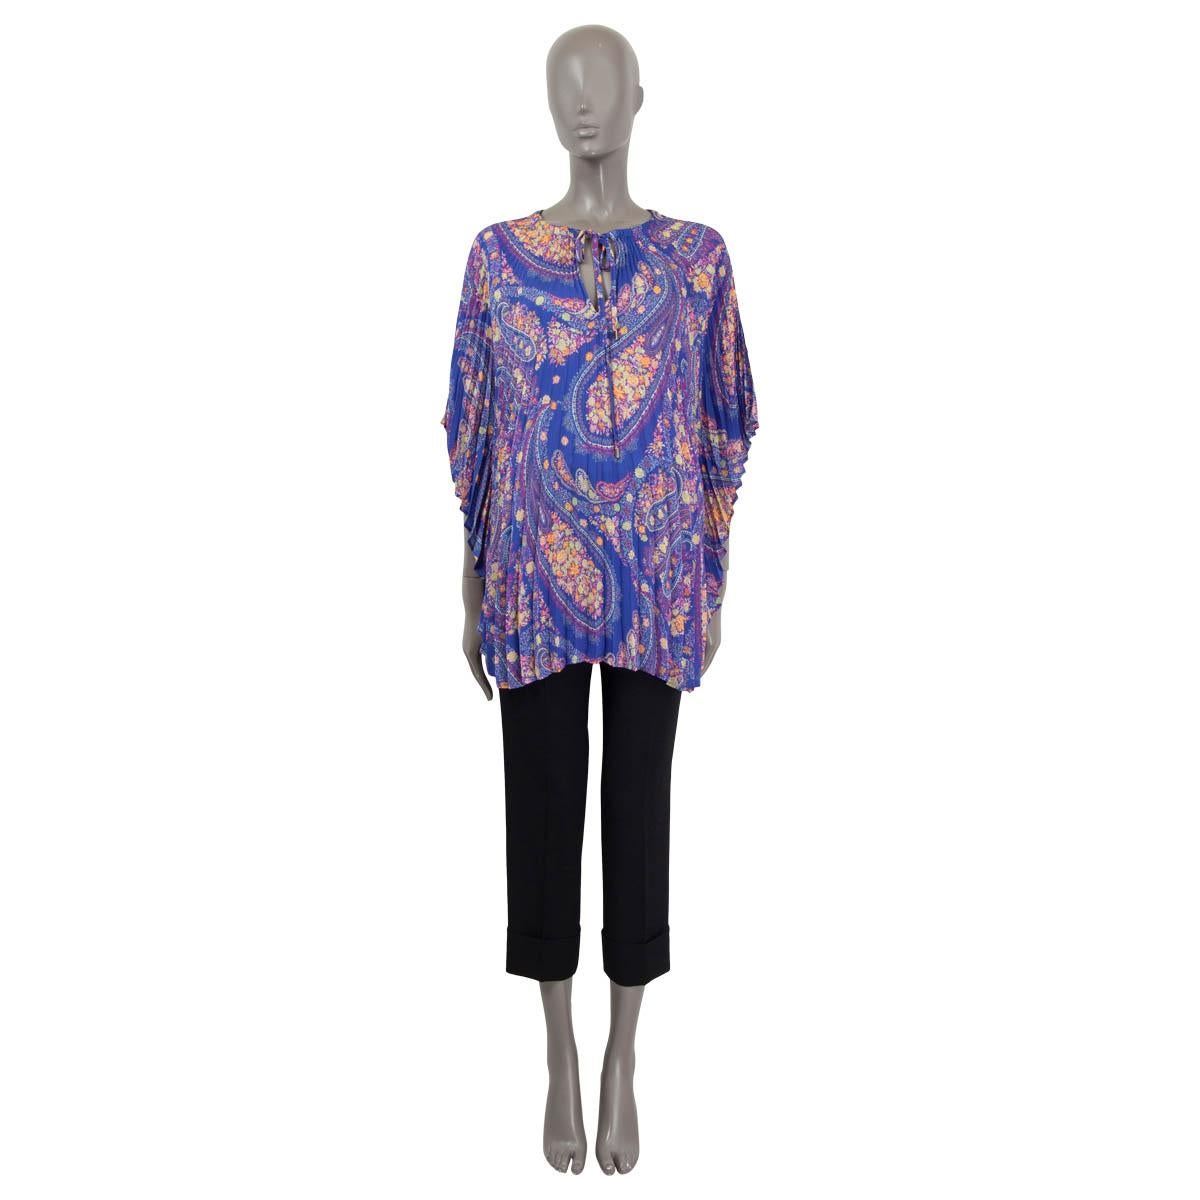 100% authentic Etro Rodin sharp plissé pleated flutter-sleeve top in blue, lilac, pink, yellow, sage and orange polyester (100%) with a large-scale paisley motif. V-neck with self-tie closure and three-quarter bell sleeves. Has been worn and is in